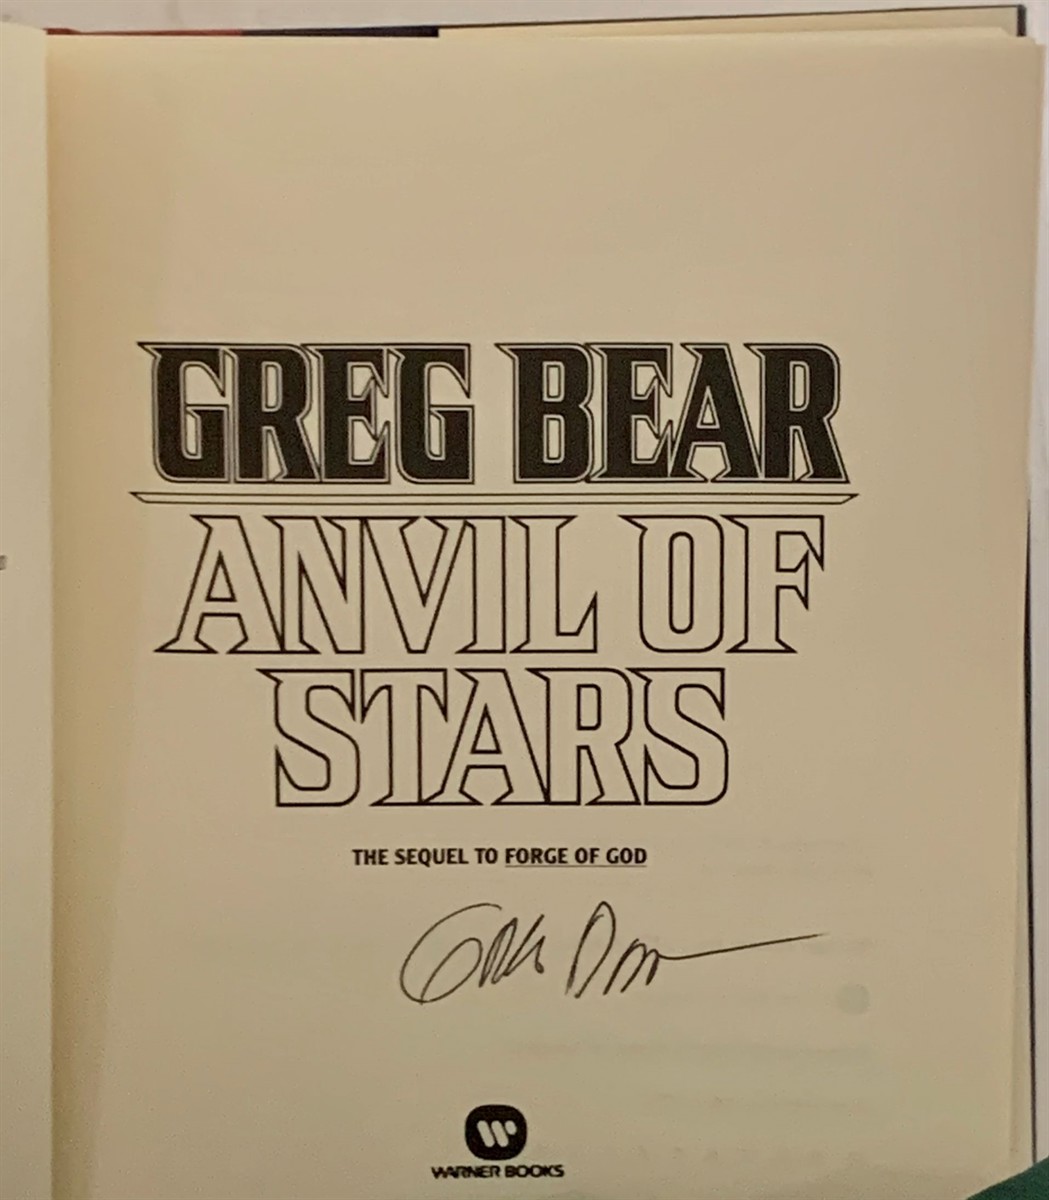 BEAR, GREG - Anvil of Stars the Sequel to Forge of God